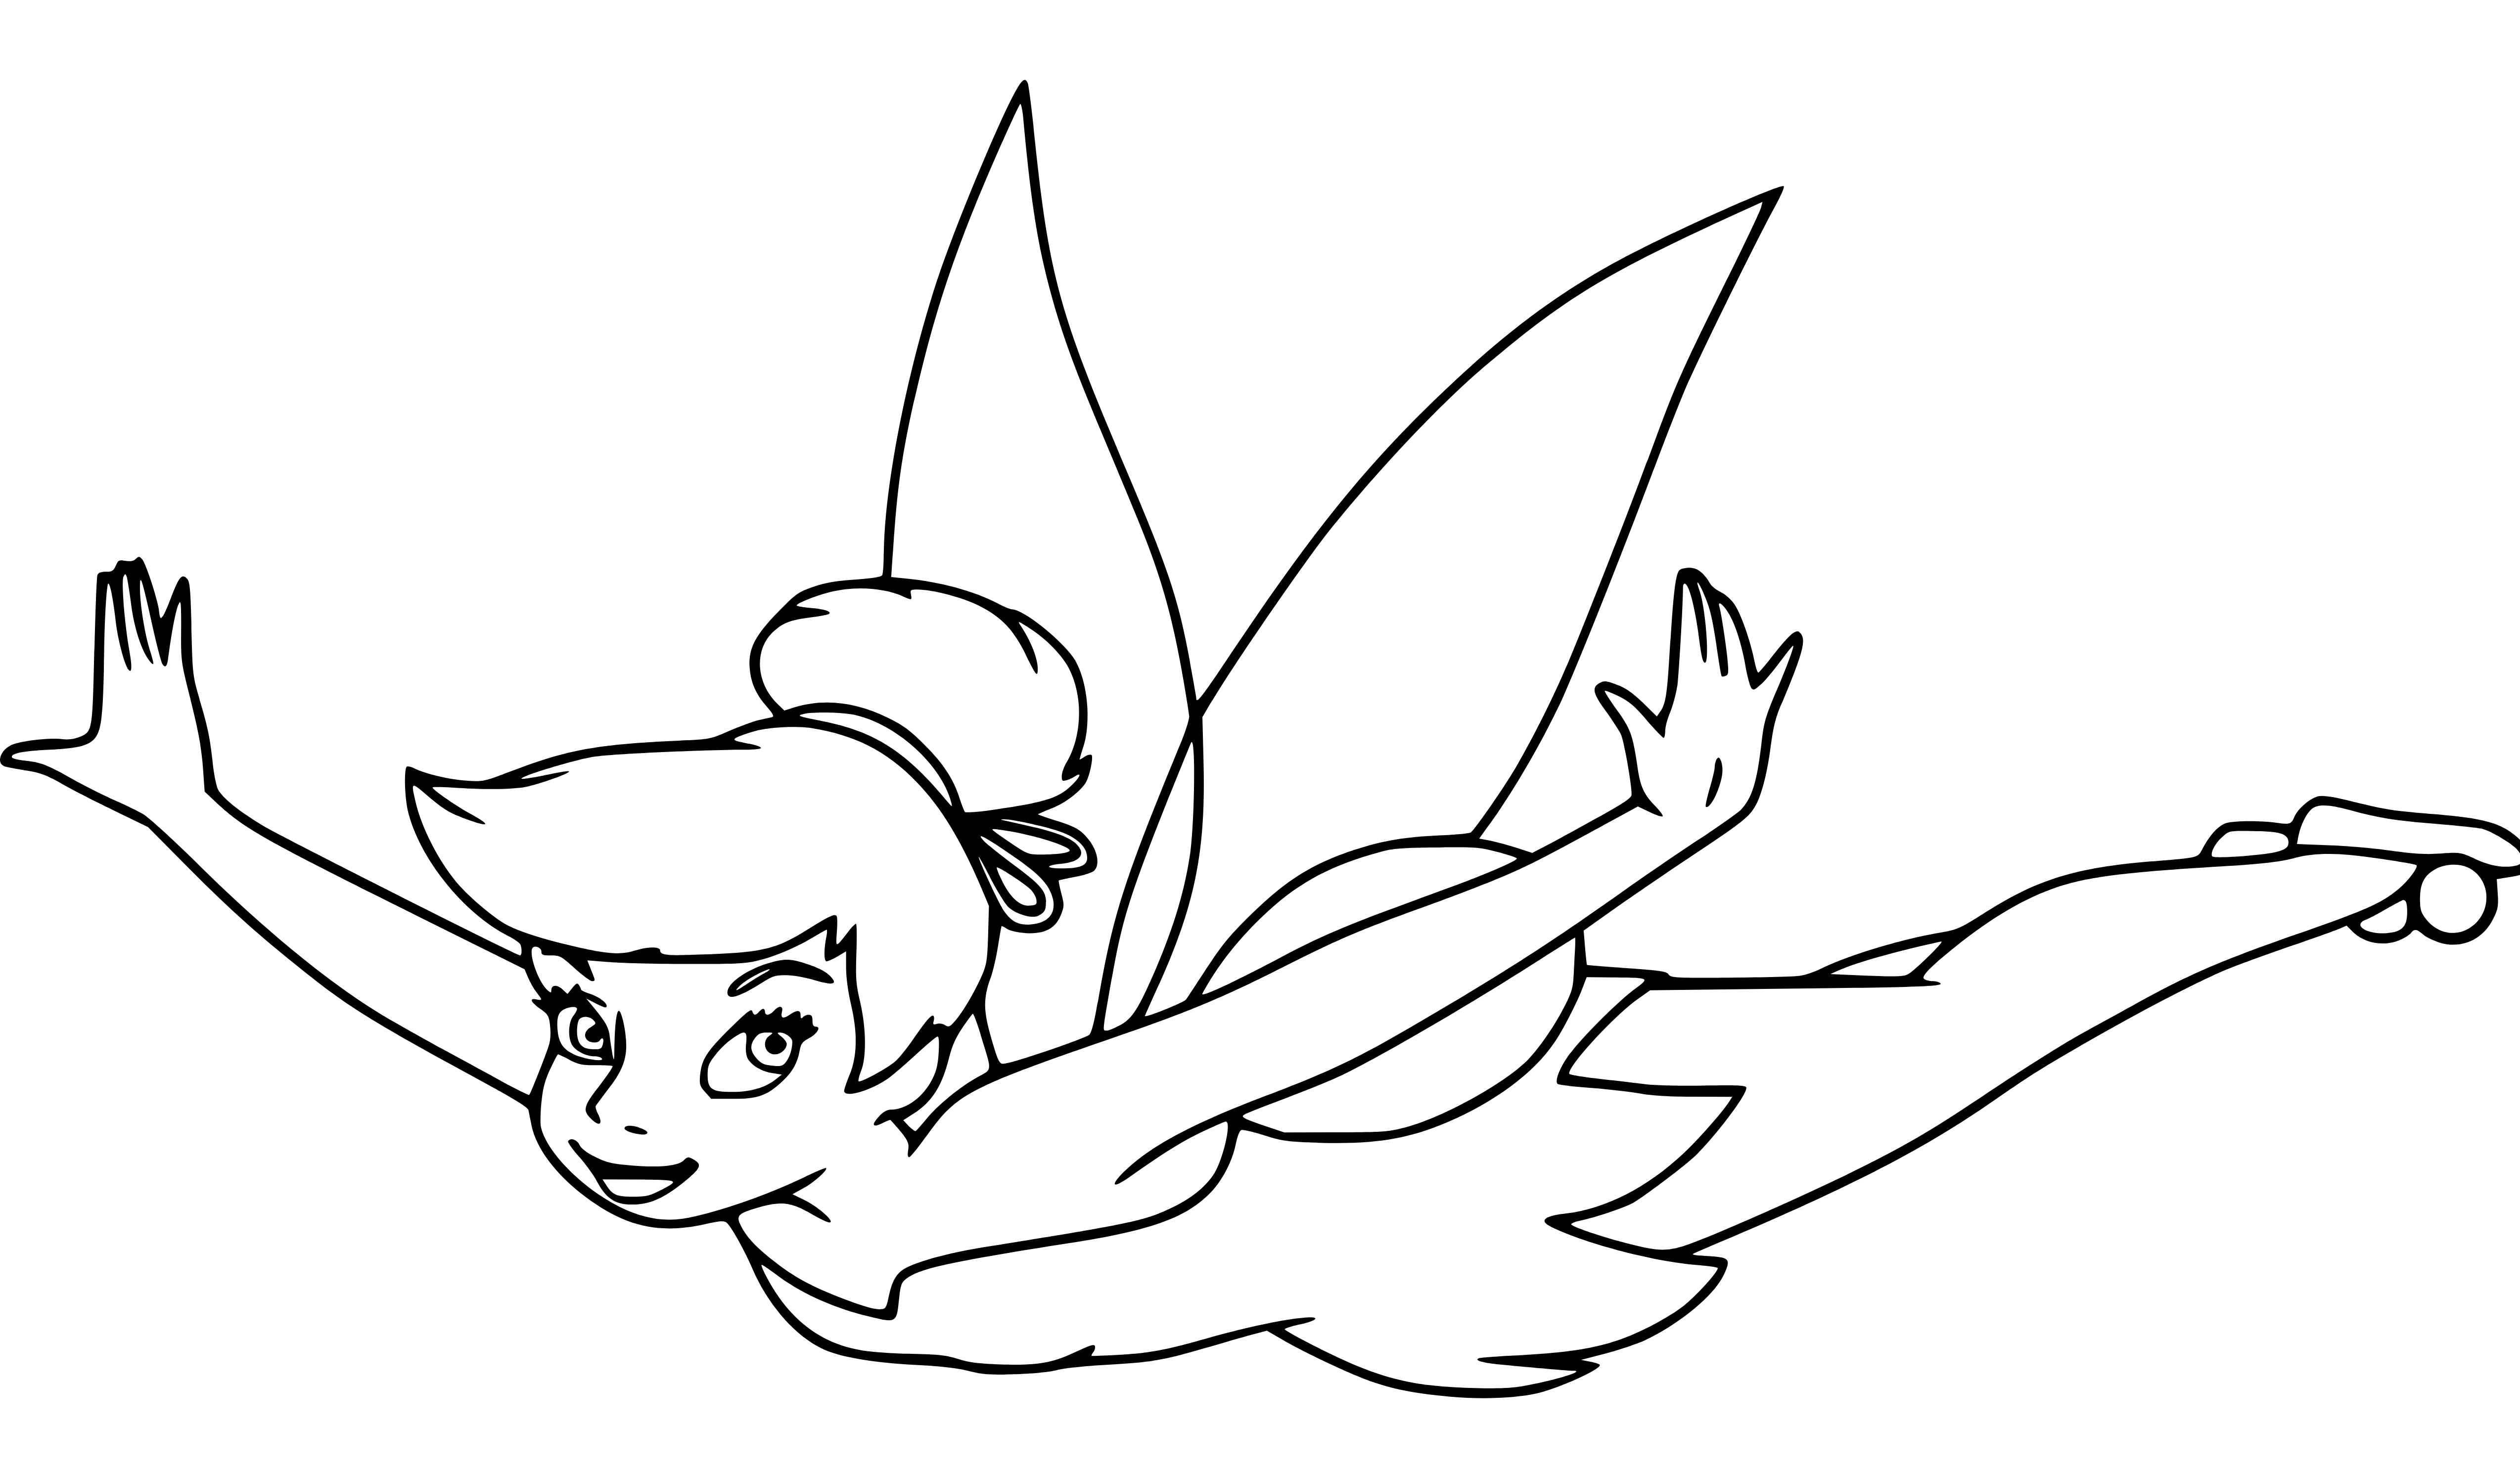 Tinker Bell Flying Coloring Page - SheetalColor.com